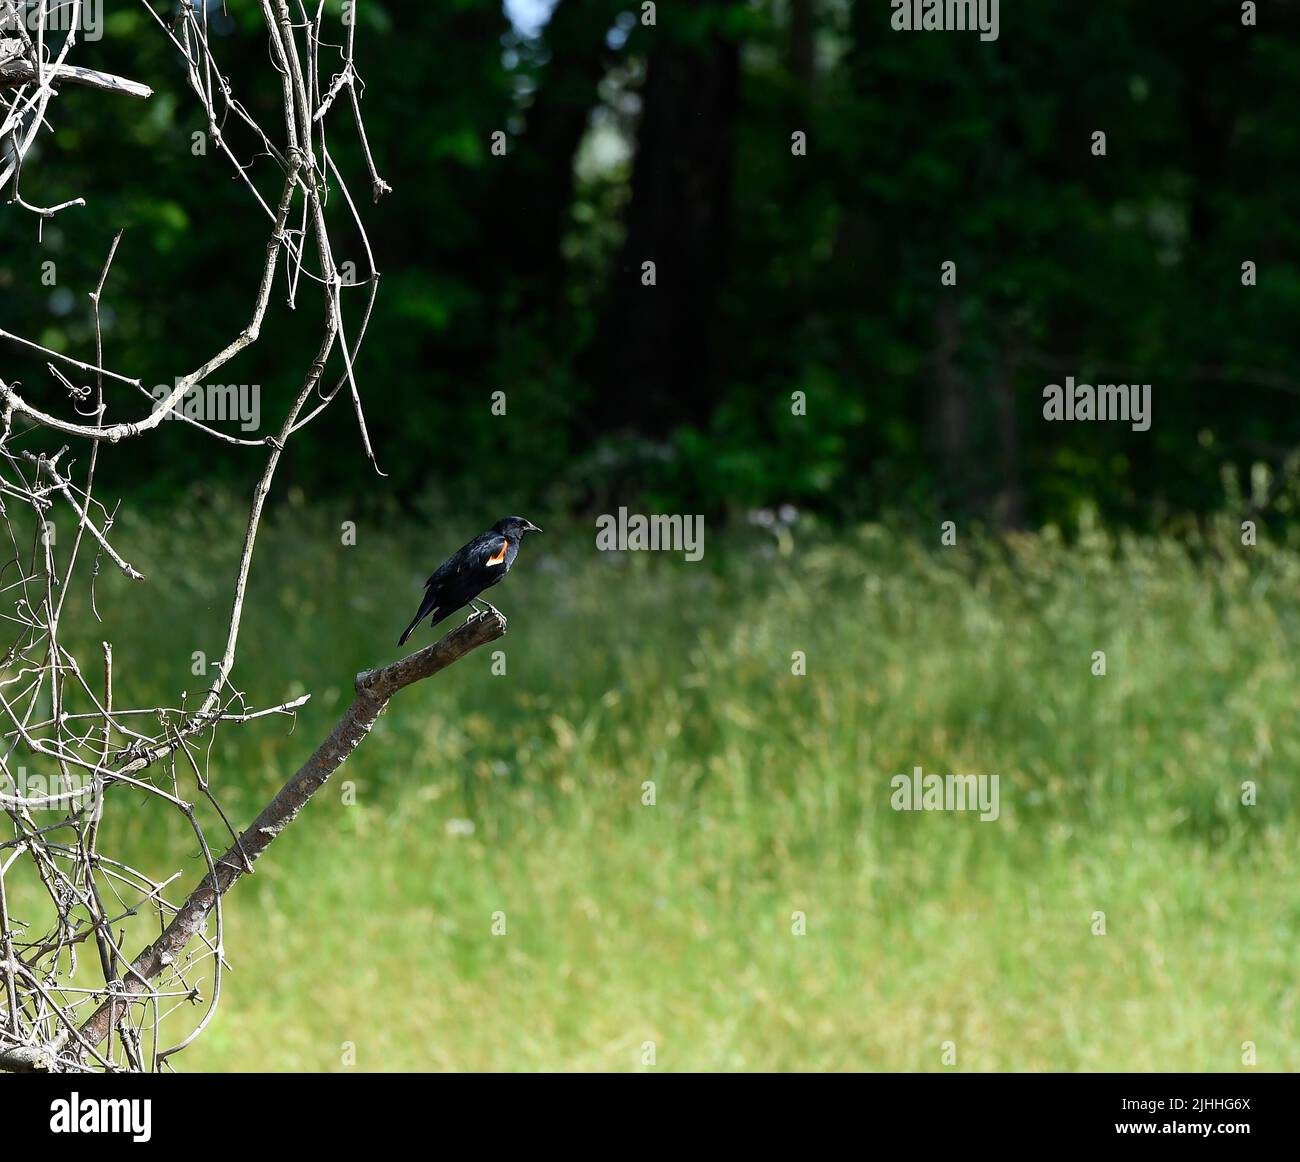 Male red-winged black bird perched on tree branch Stock Photo